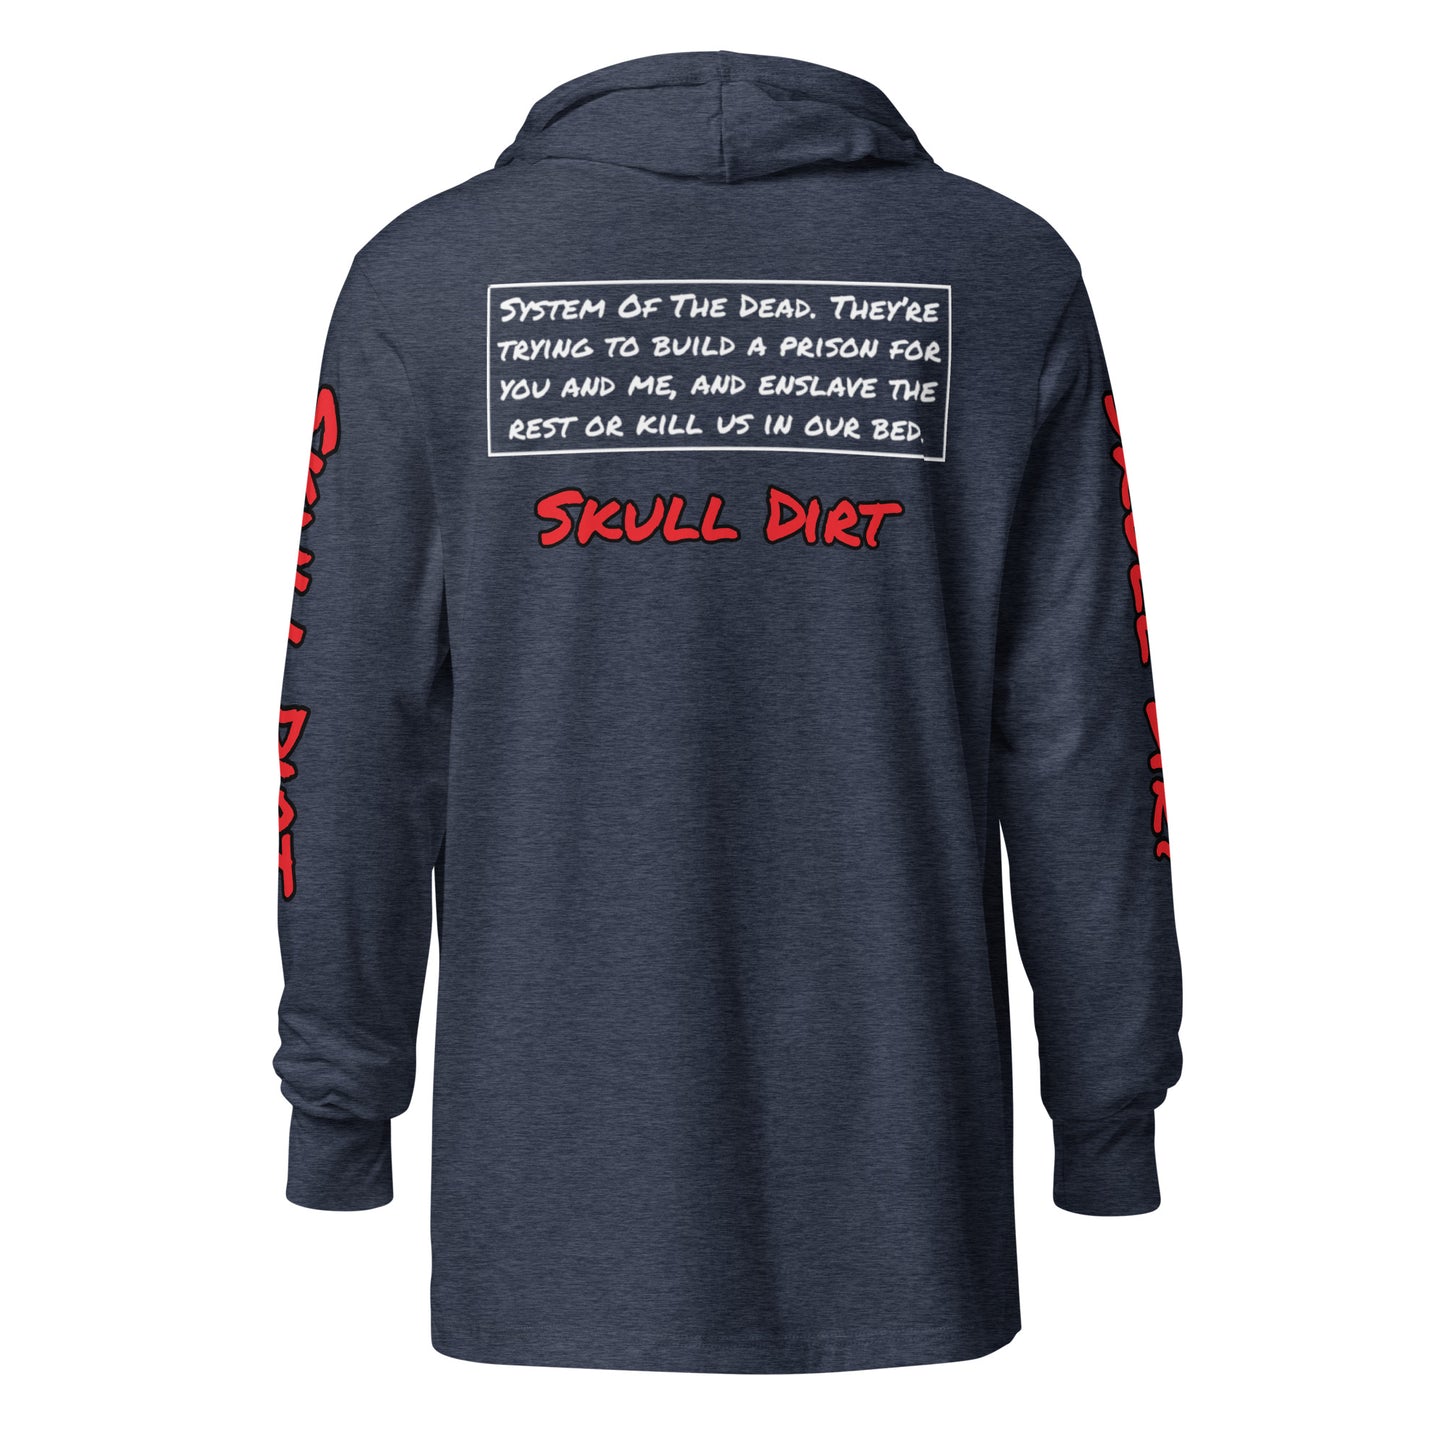 "System Of The Dead" Hooded long-sleeve tee SofD LonS